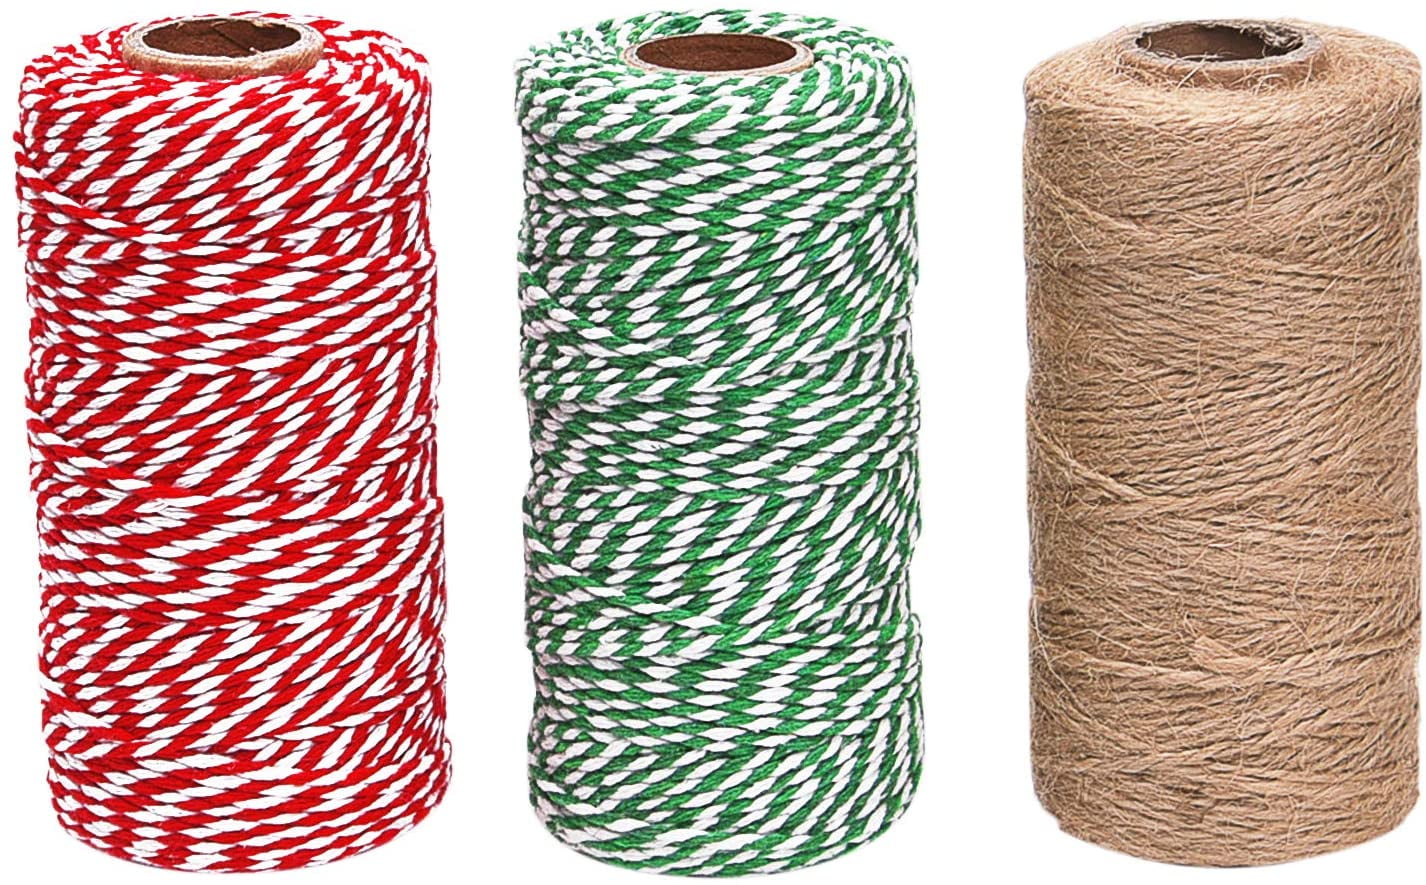 BambooMN 75 Yard, 2mm Crafty Jute Twine Thread Cord String Jute for  Artworks, DIY Crafts, Gift Wrapping, Picture Display and Gardening, 3 Balls  Red 